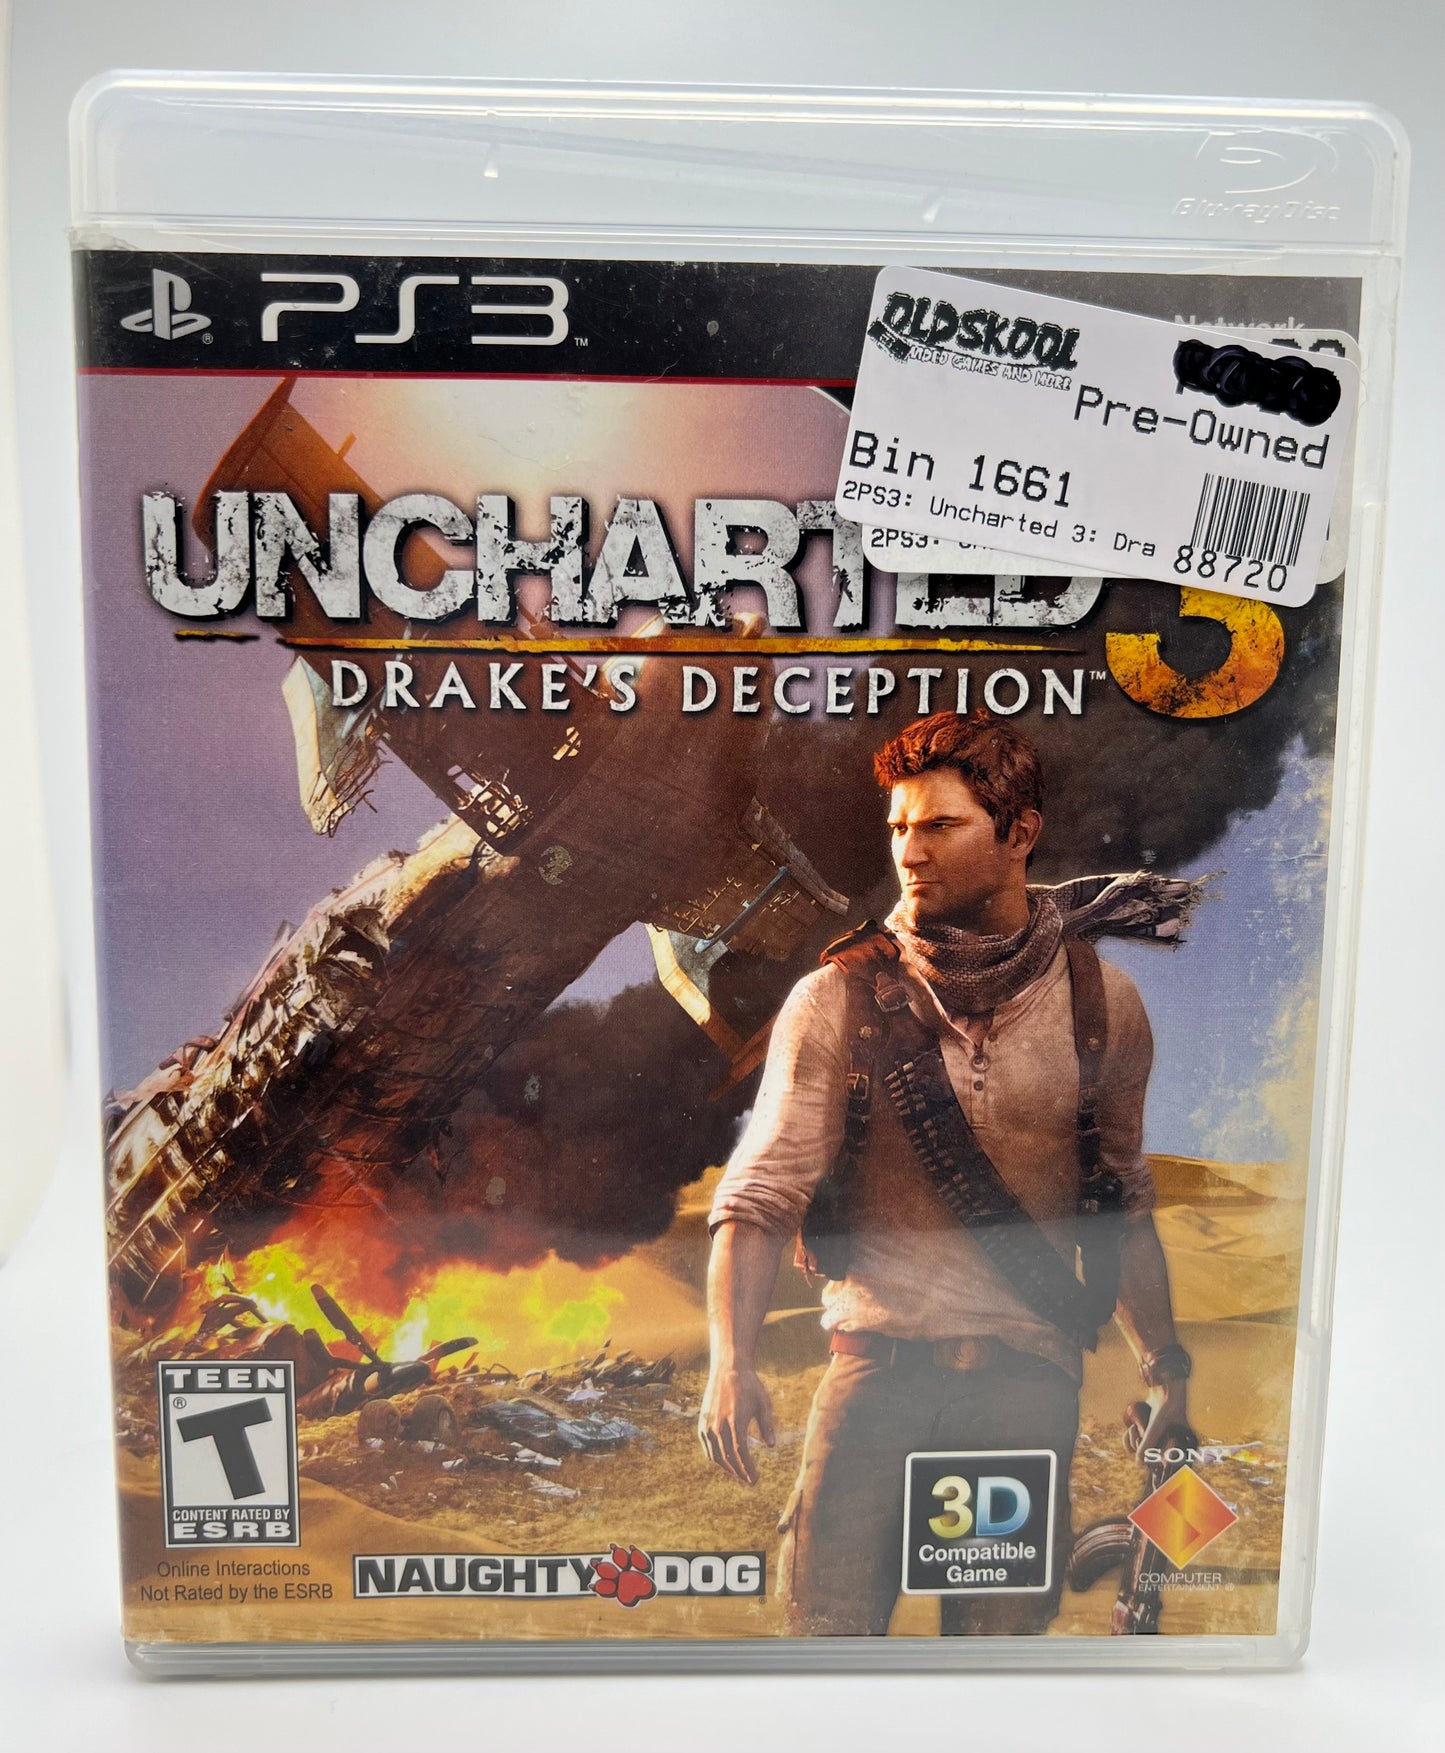 Uncharted 3 - Playstation 3